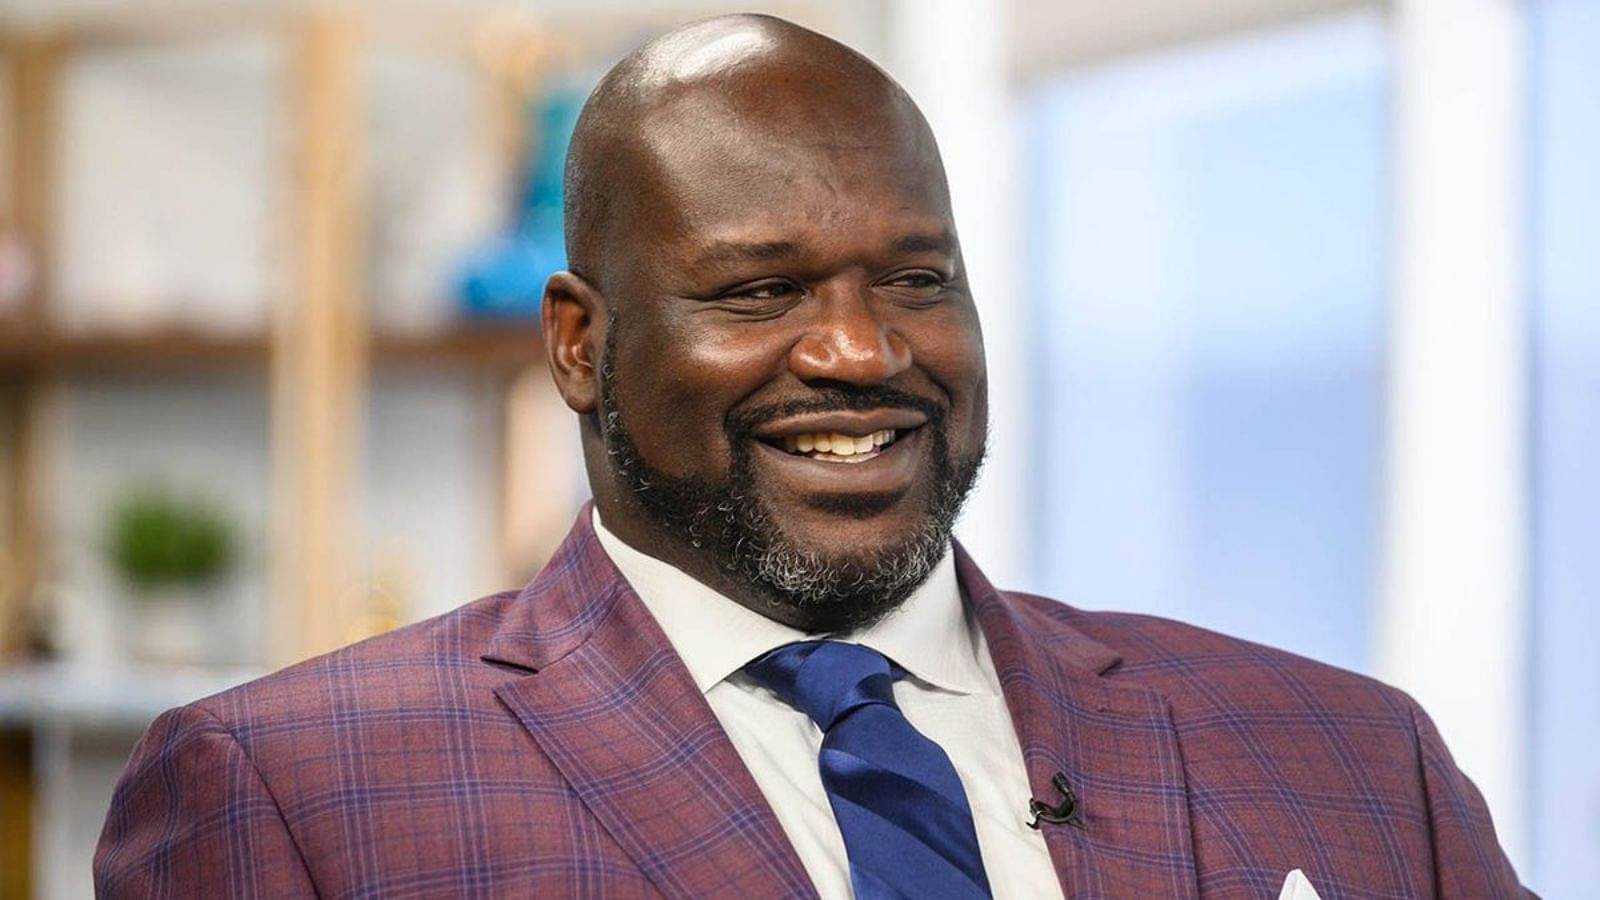 $120M actress is the only woman who can make 7ft 1’ Shaquille O’Neal stutter